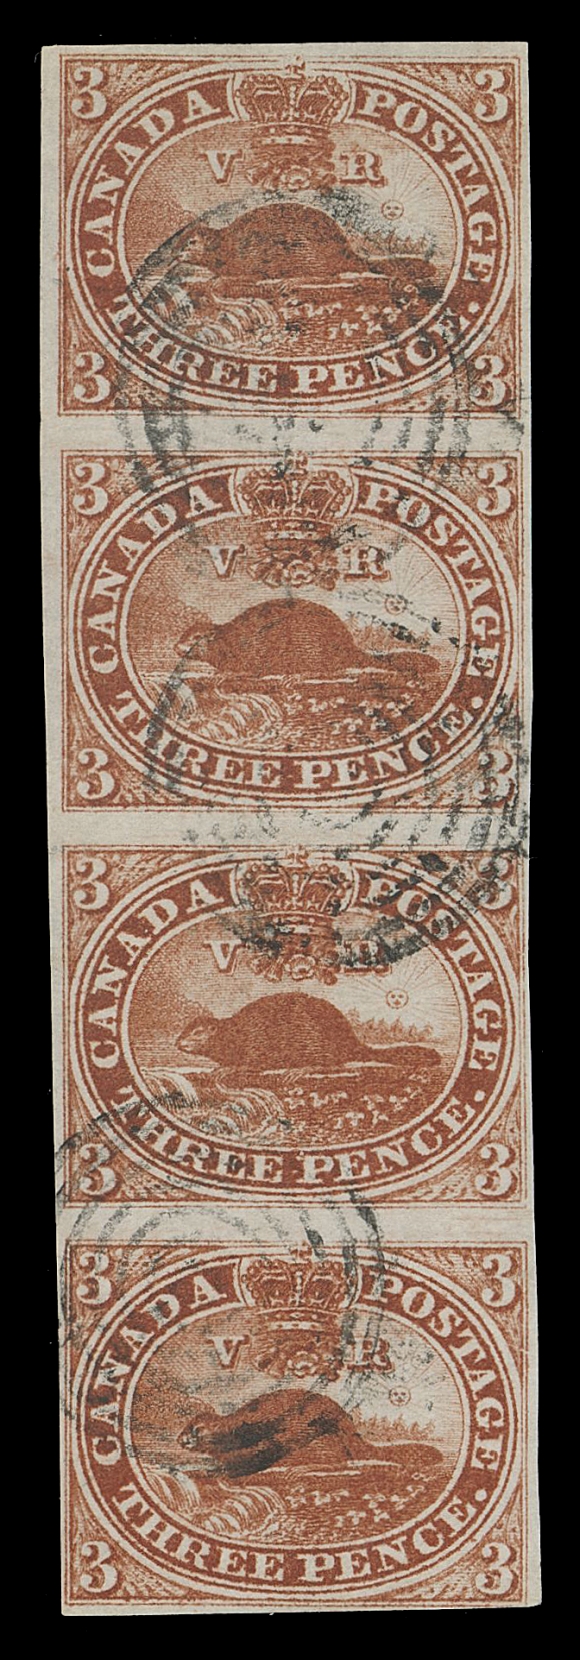 CANADA -  2 PENCE  4i,A very scarce used strip of four with clear to large margins, deep rich colour on pristine wove paper, light concentric rings cancellations. Fault-free multiples larger than pairs are very difficult to obtain; a great item for the advanced collector, Fine+; 2004 Greene Foundation cert.

Provenance: Charles Lathrop Pack Part III, Harmer Rooke & Co., November 1989; Lot 1561
                   Foxbridge (John du Pont) Collection, private treaty (circa. 1988)
                   Weill Brothers, Christie